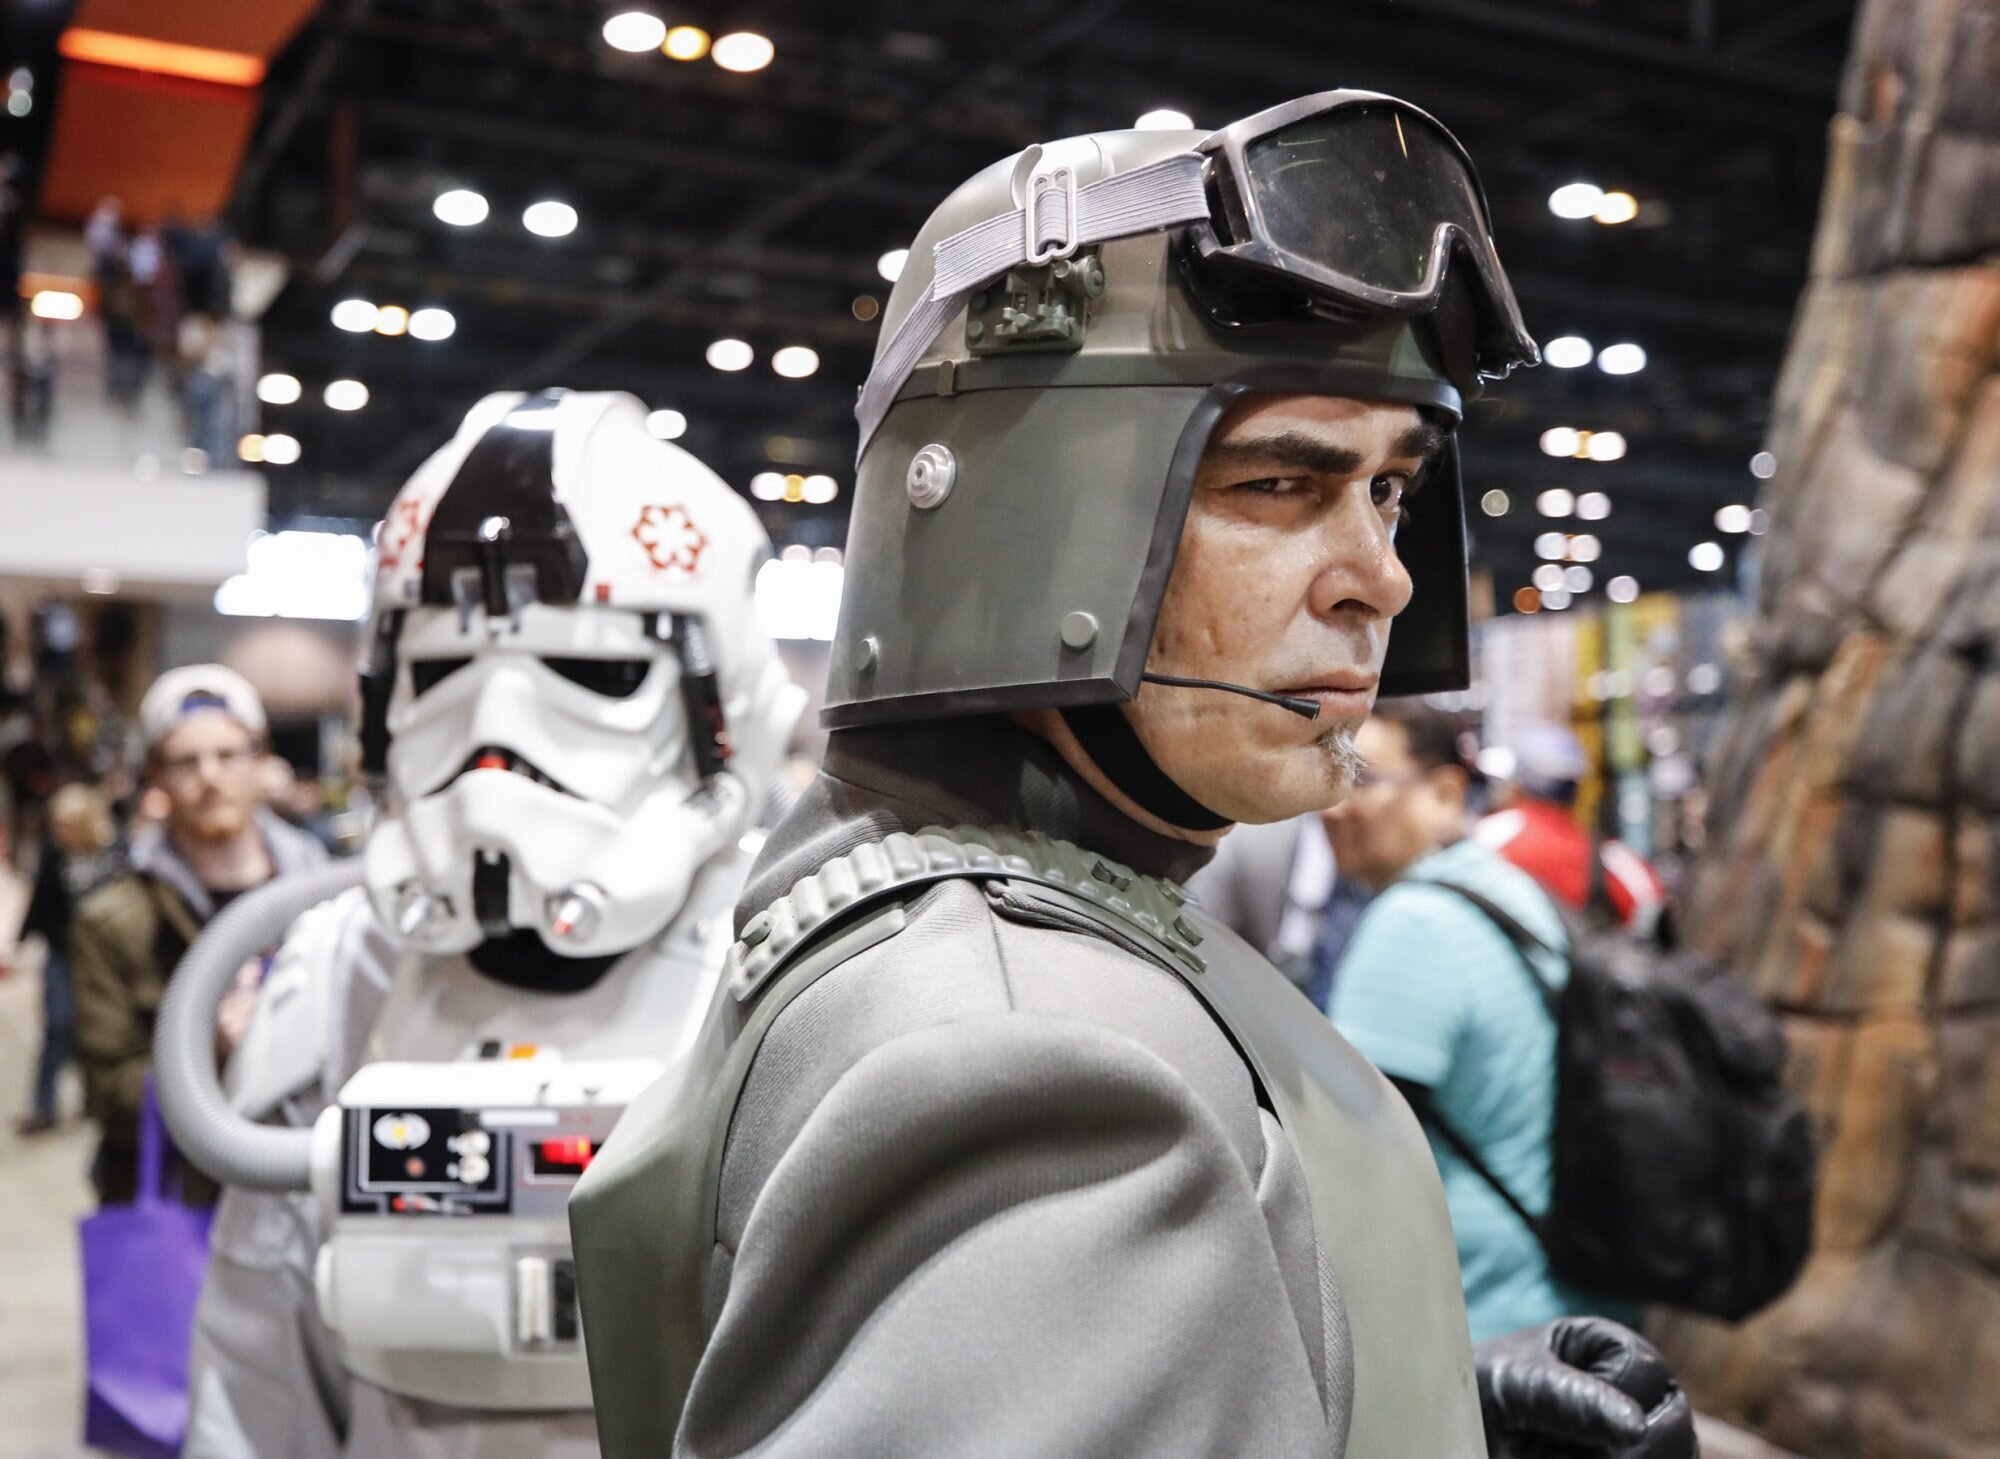 Star Wars Celebration: See photo of cosplayers